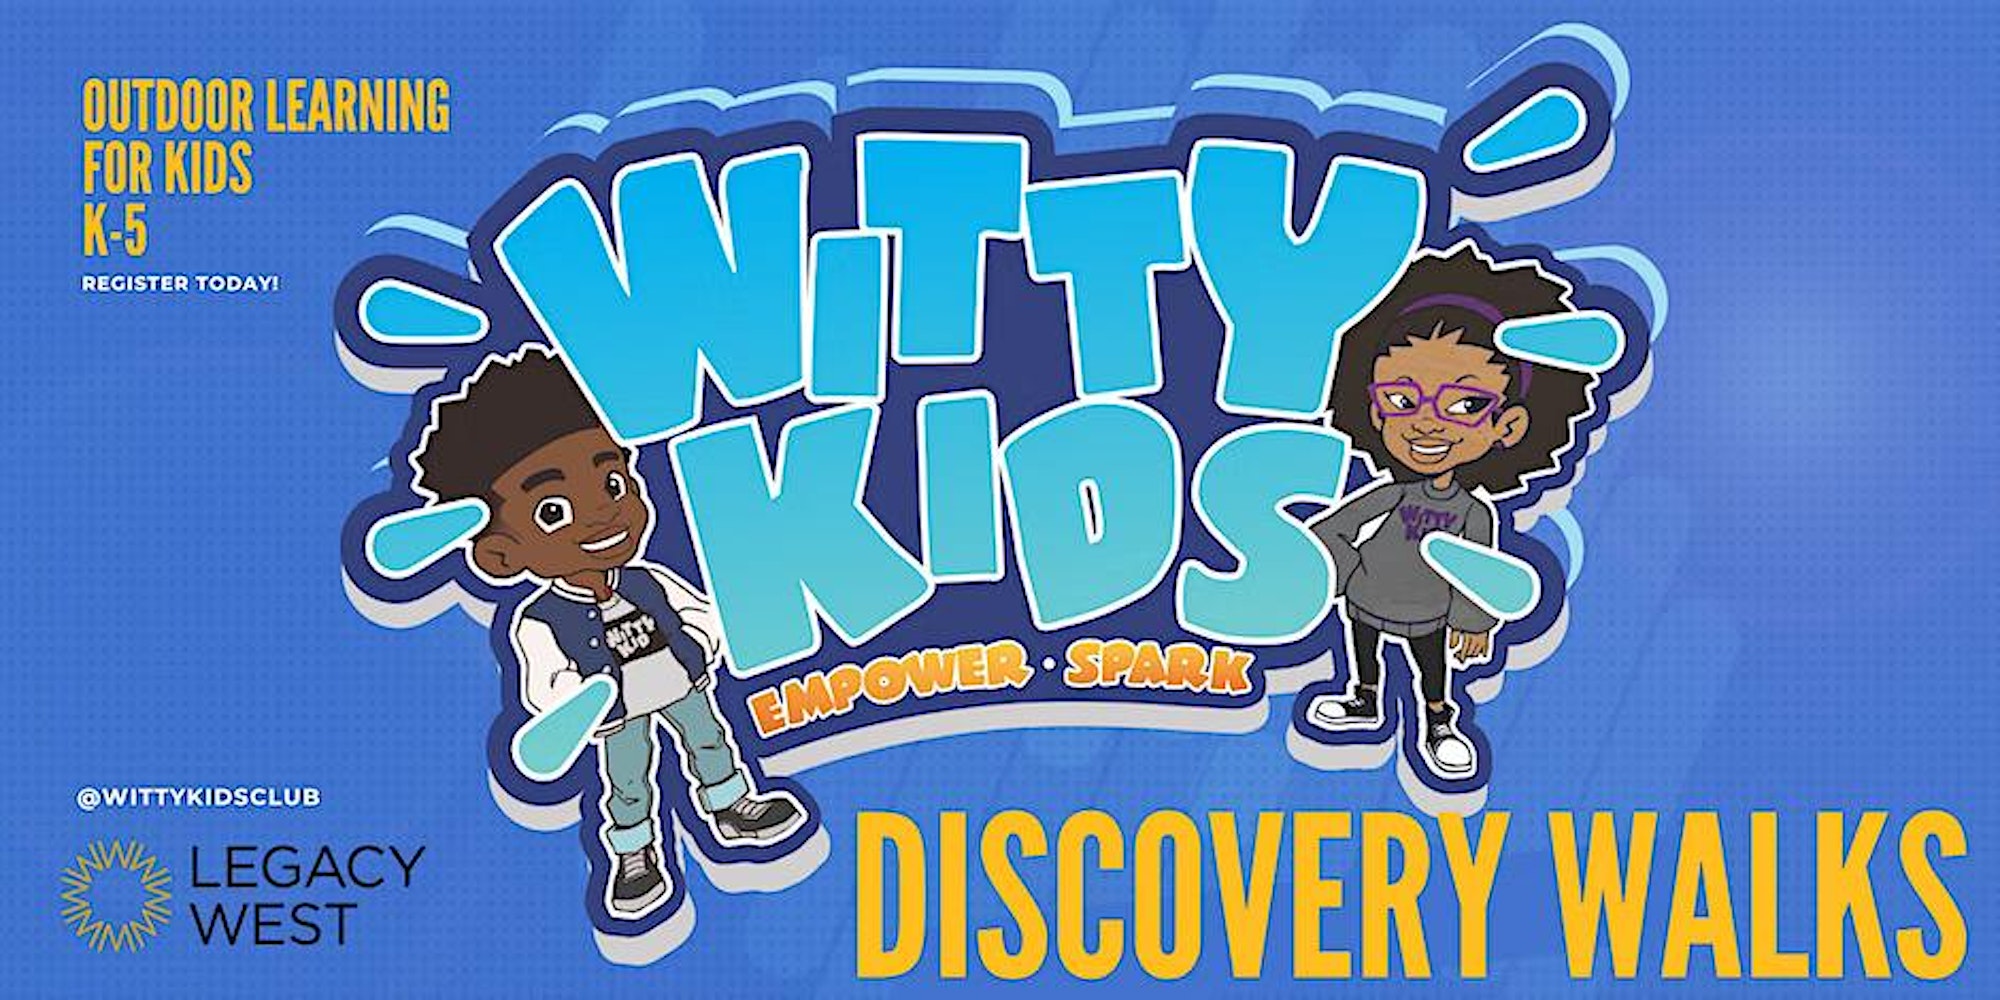 Witty Kids Discovery Walk at Legacy West